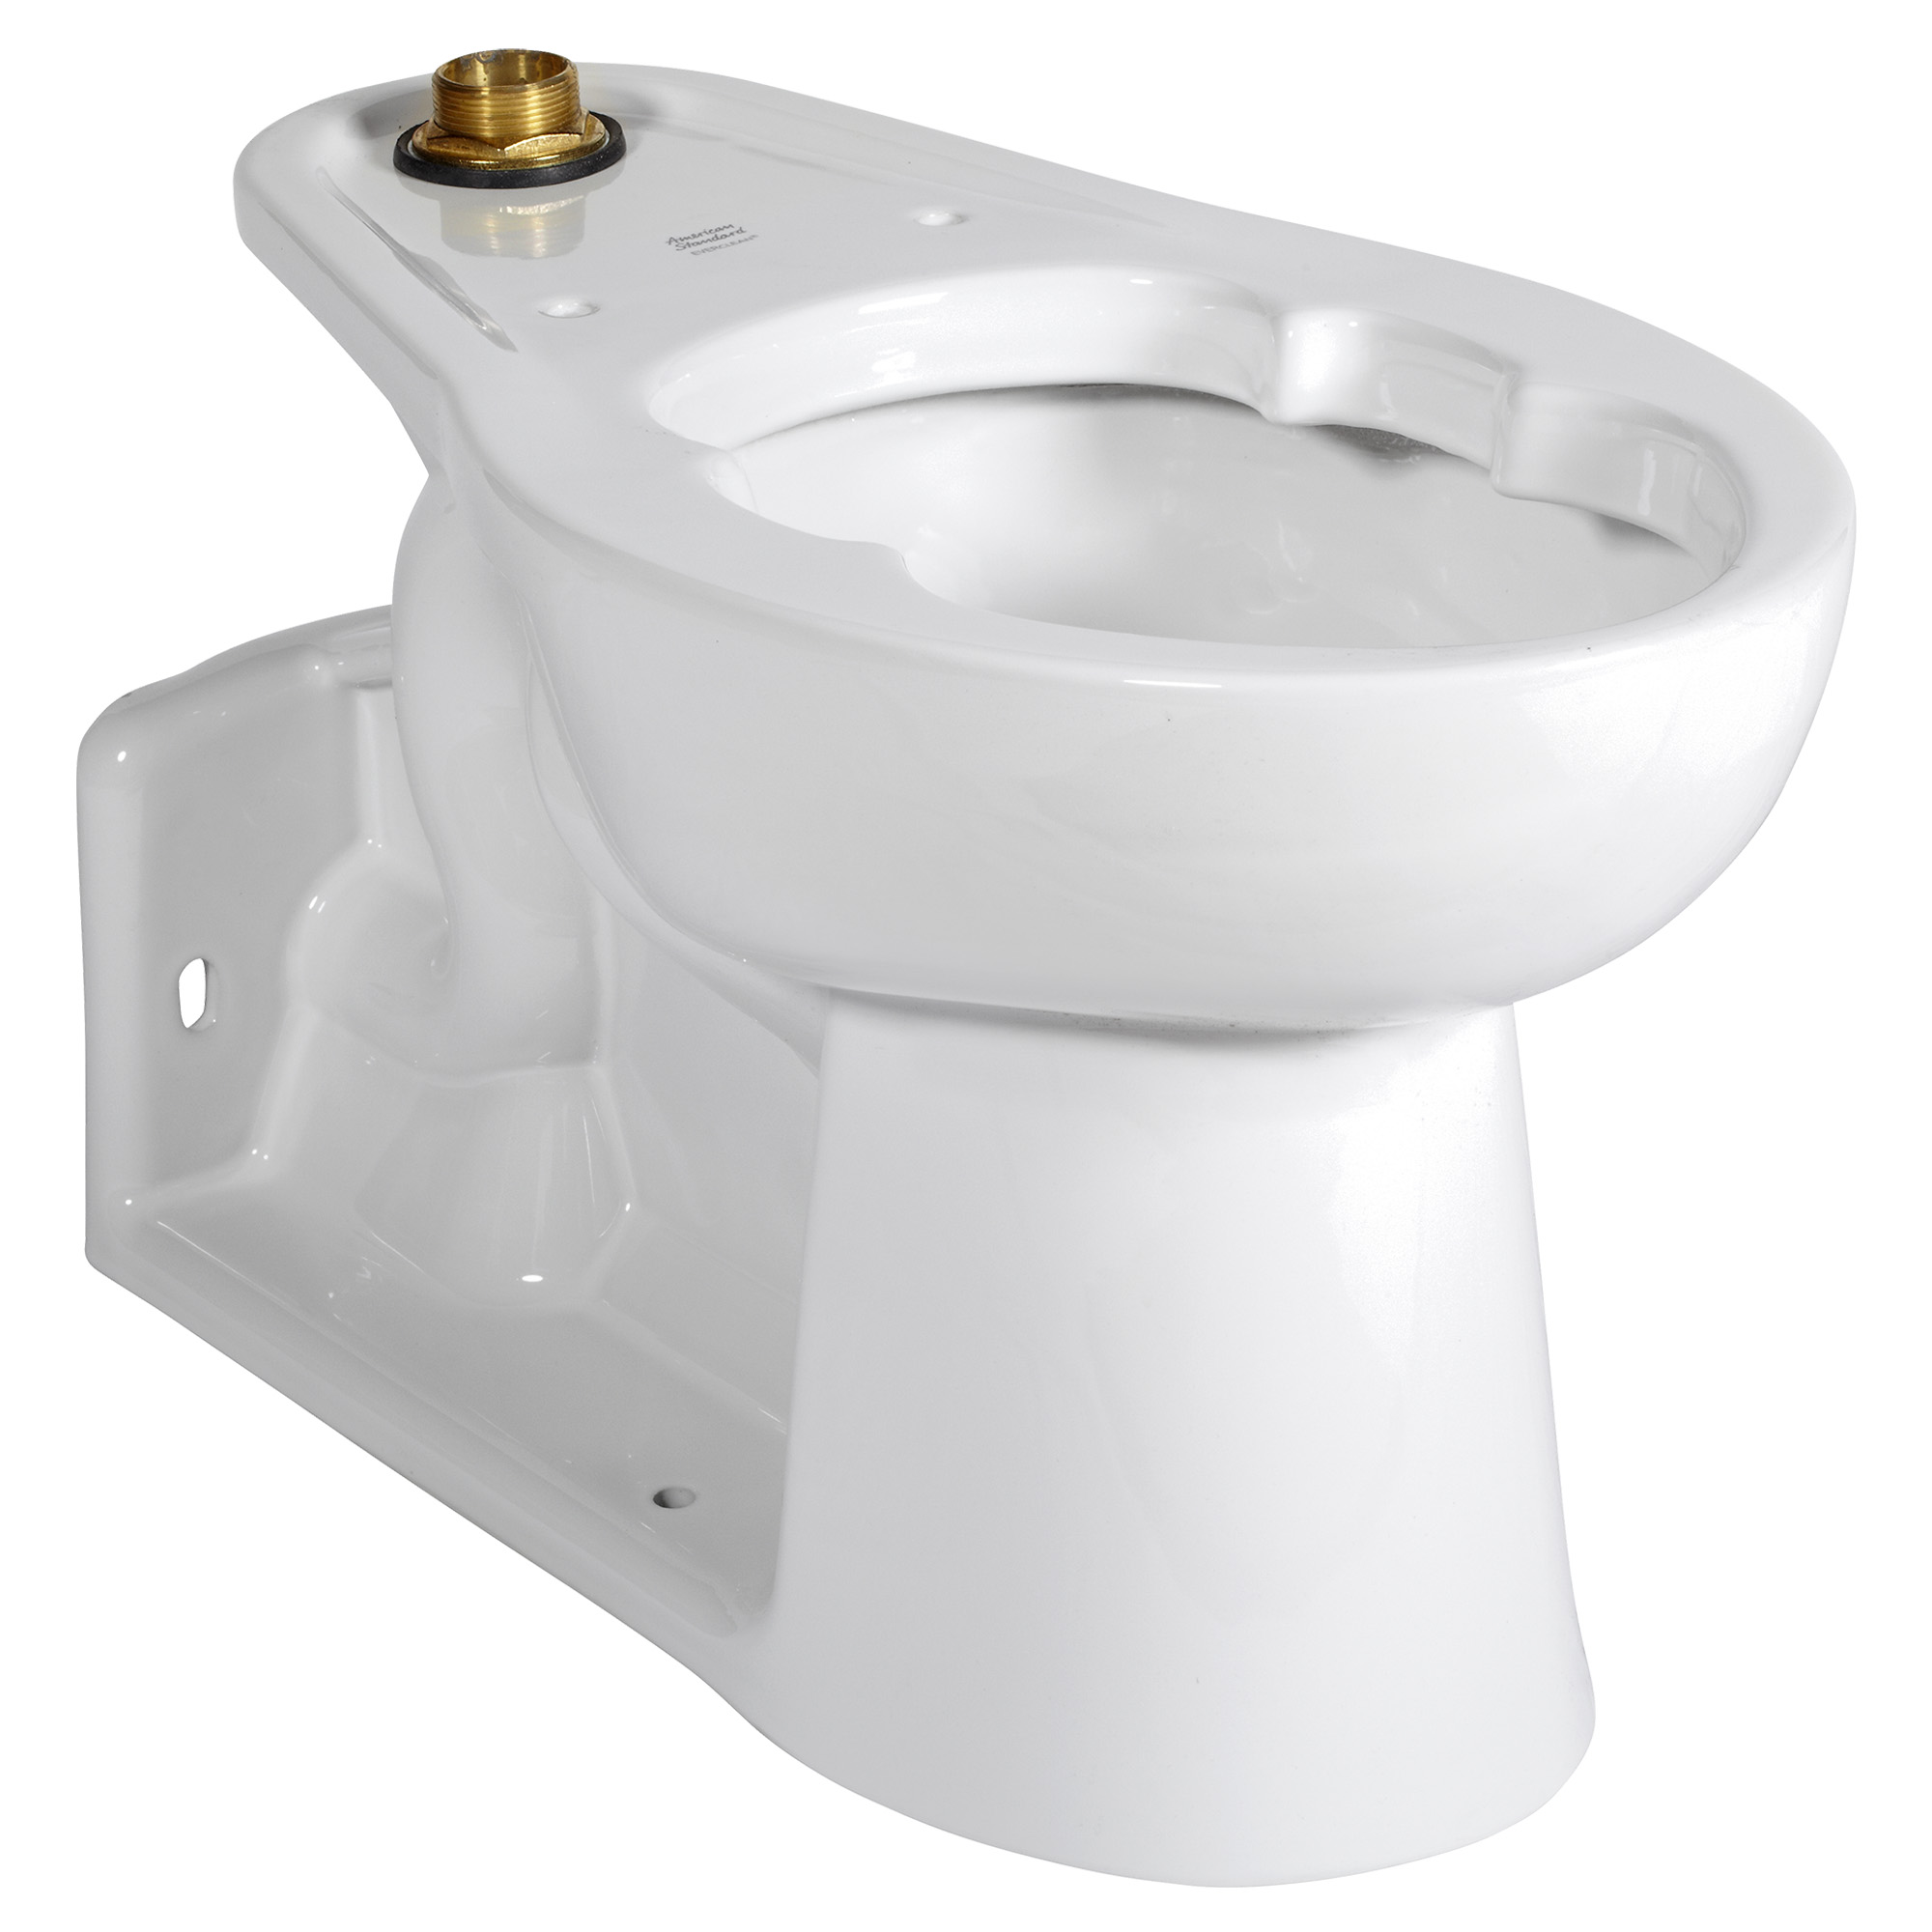 Priolo™ 1.1 – 1.6 gpf (4.2 – 6.0 Lpf) Chair Height Top Spud Back Outlet Elongated EverClean™ Bowl With Bedpan Lugs